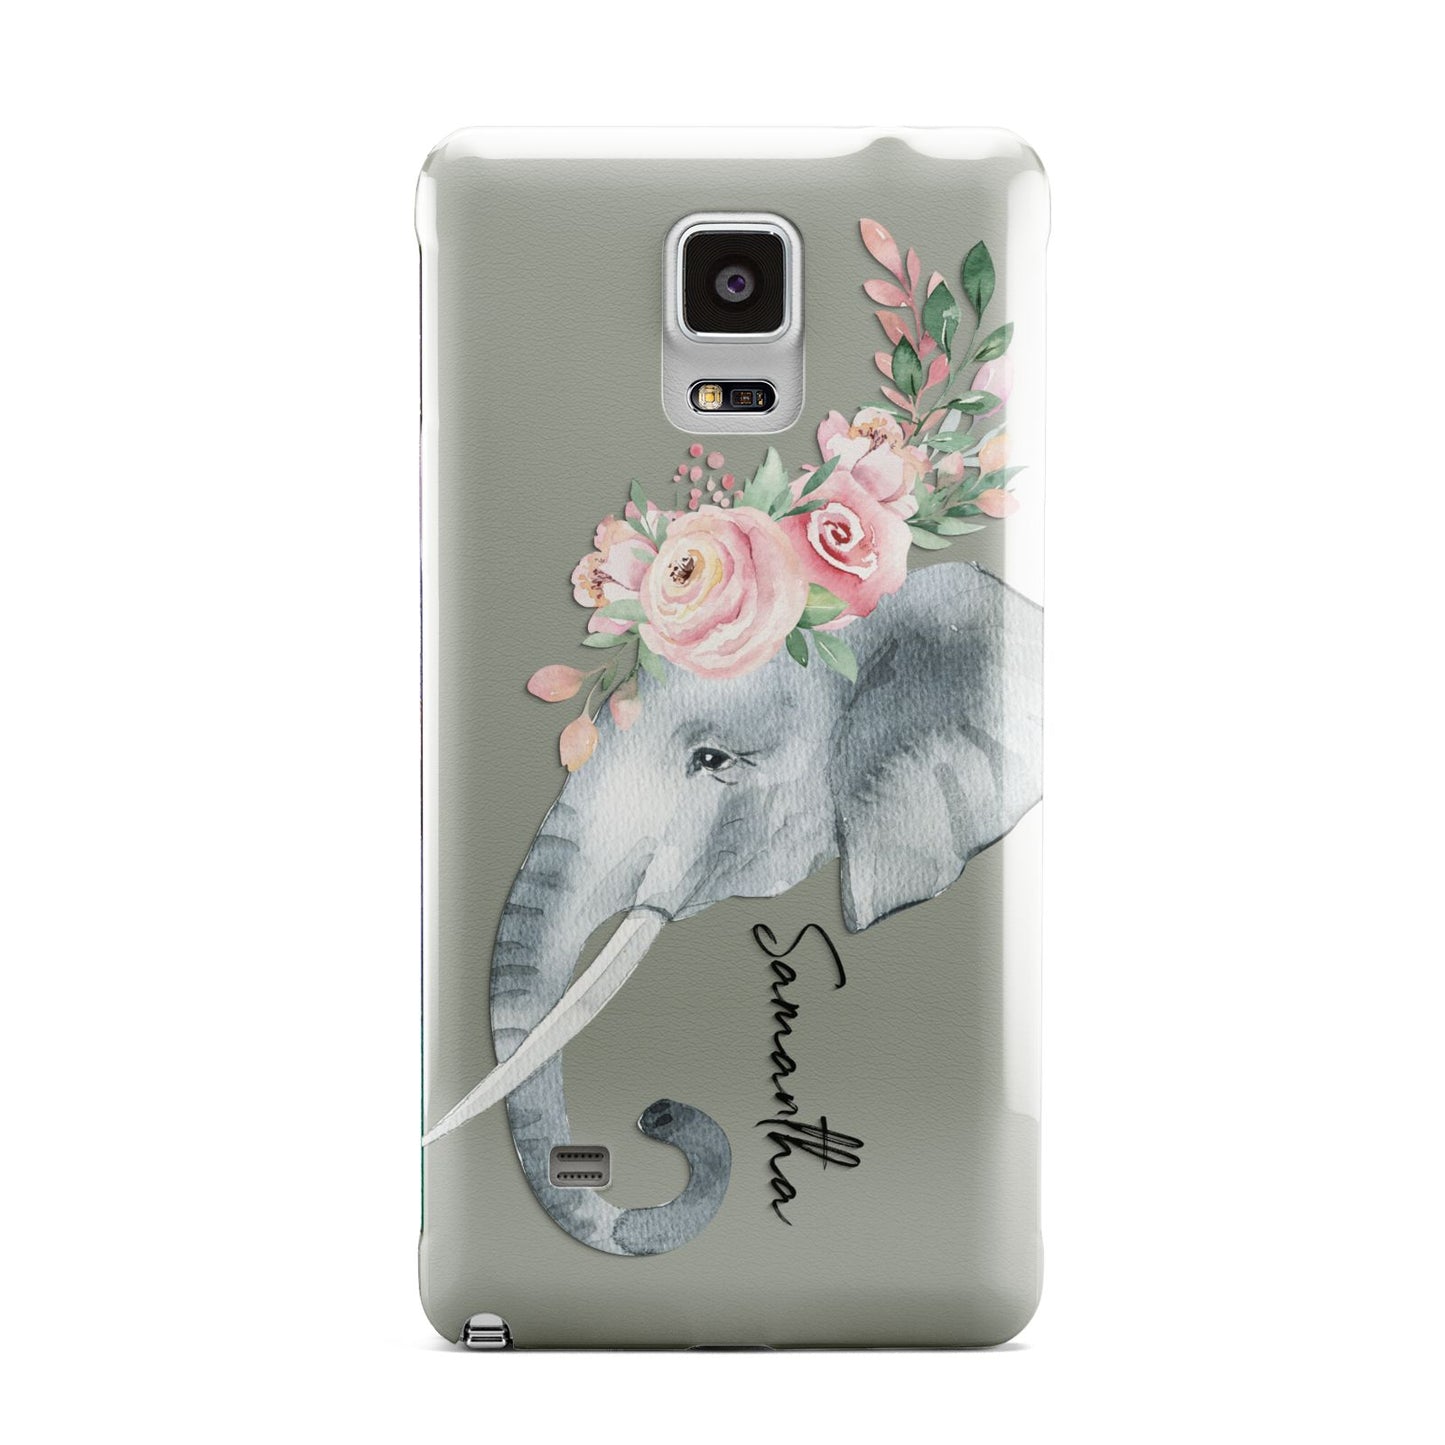 Personalised Elephant Samsung Galaxy Note 4 Case